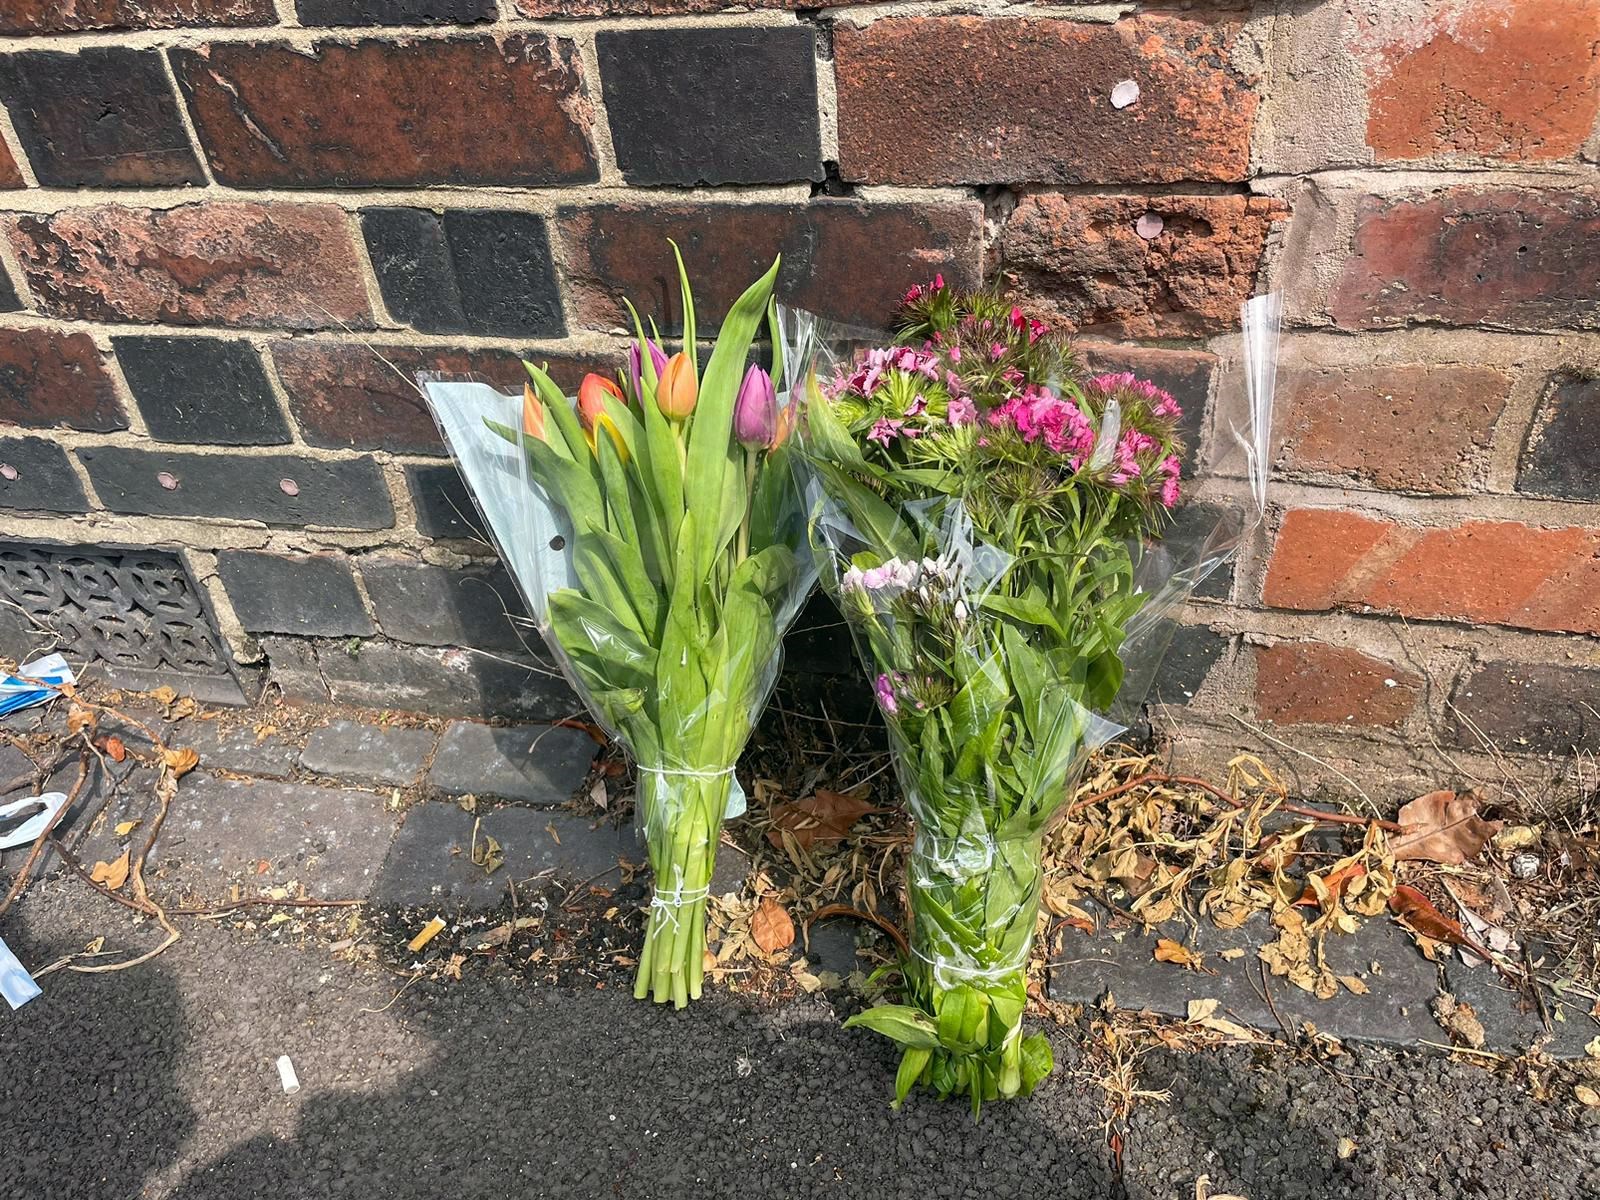 Flowers at the scene of the incident (Stephanie Wareham/PA)